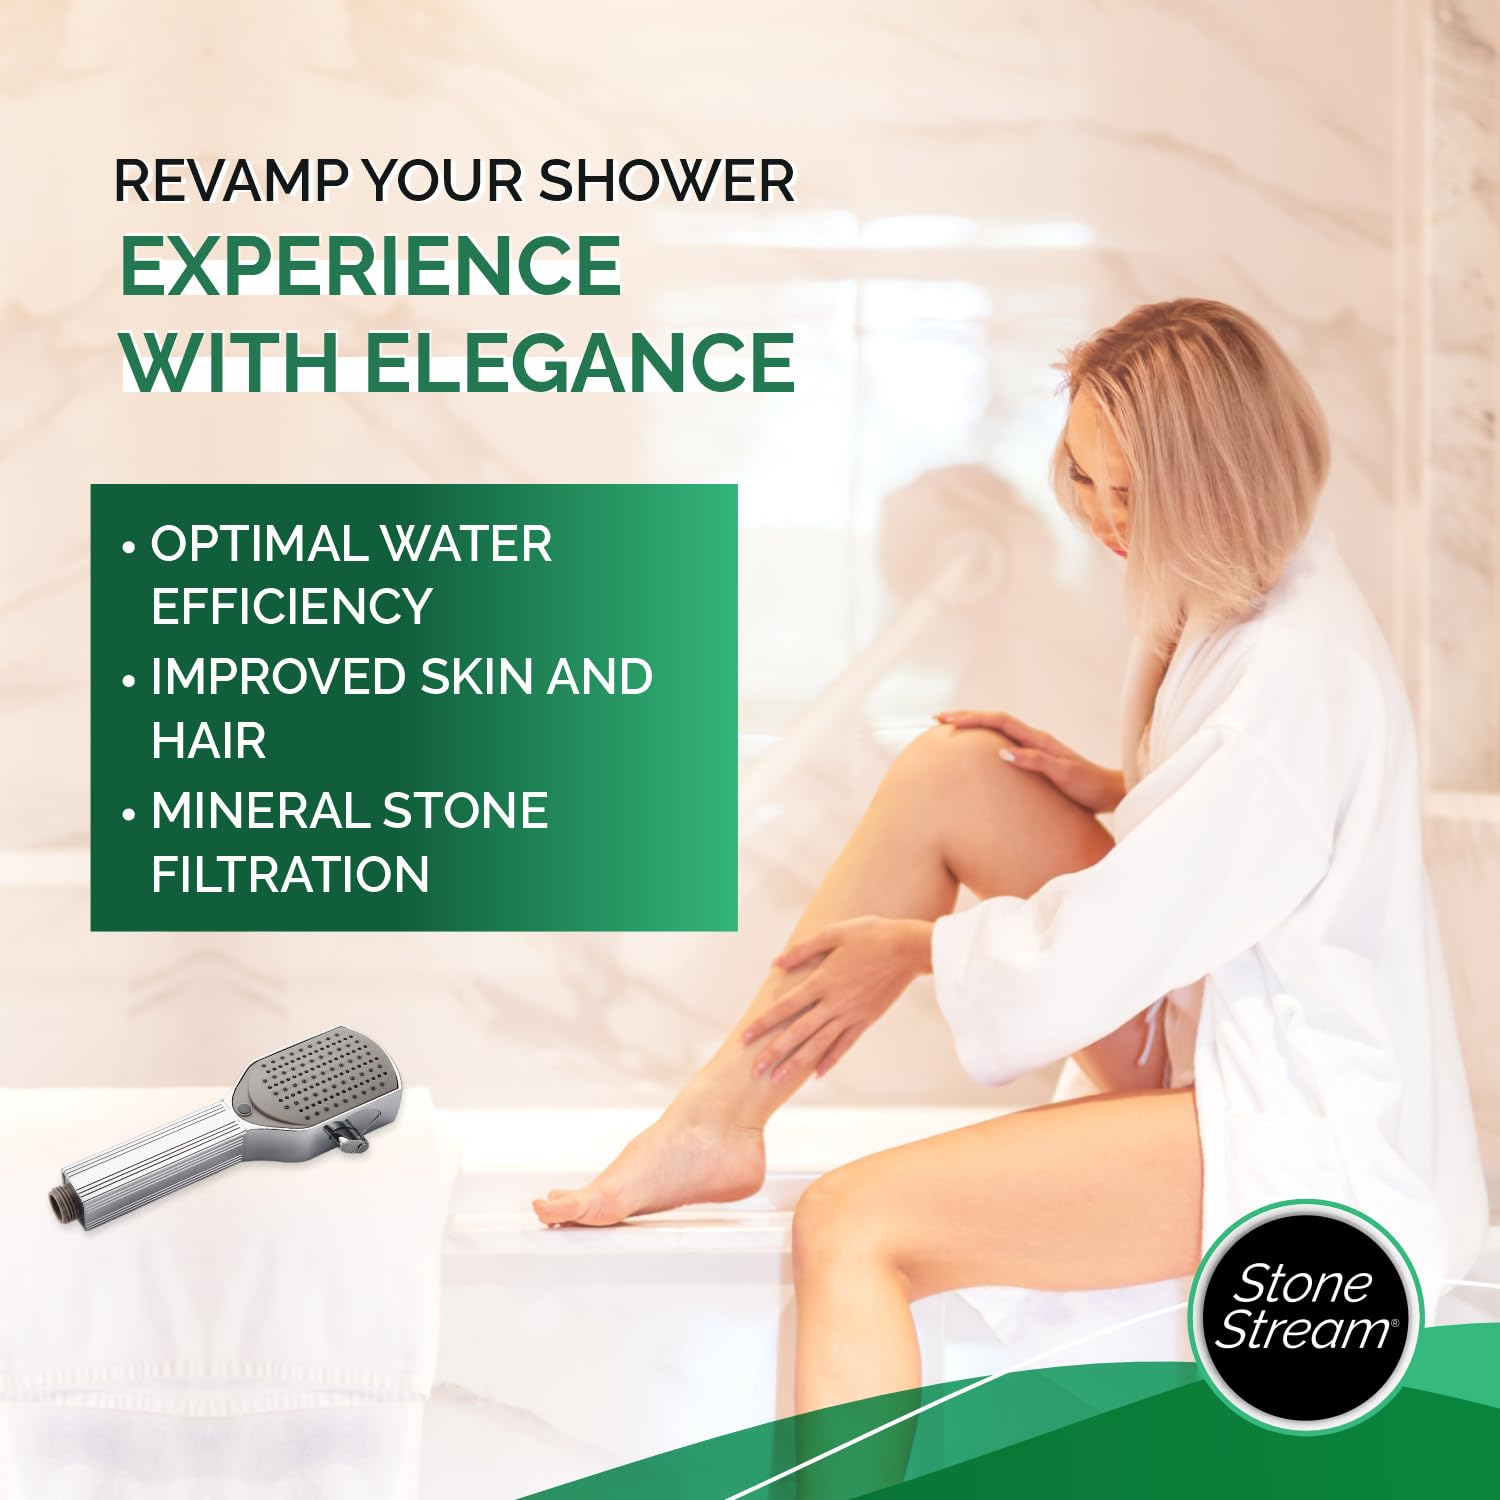 Eco-friendly handheld shower head with water-saving features